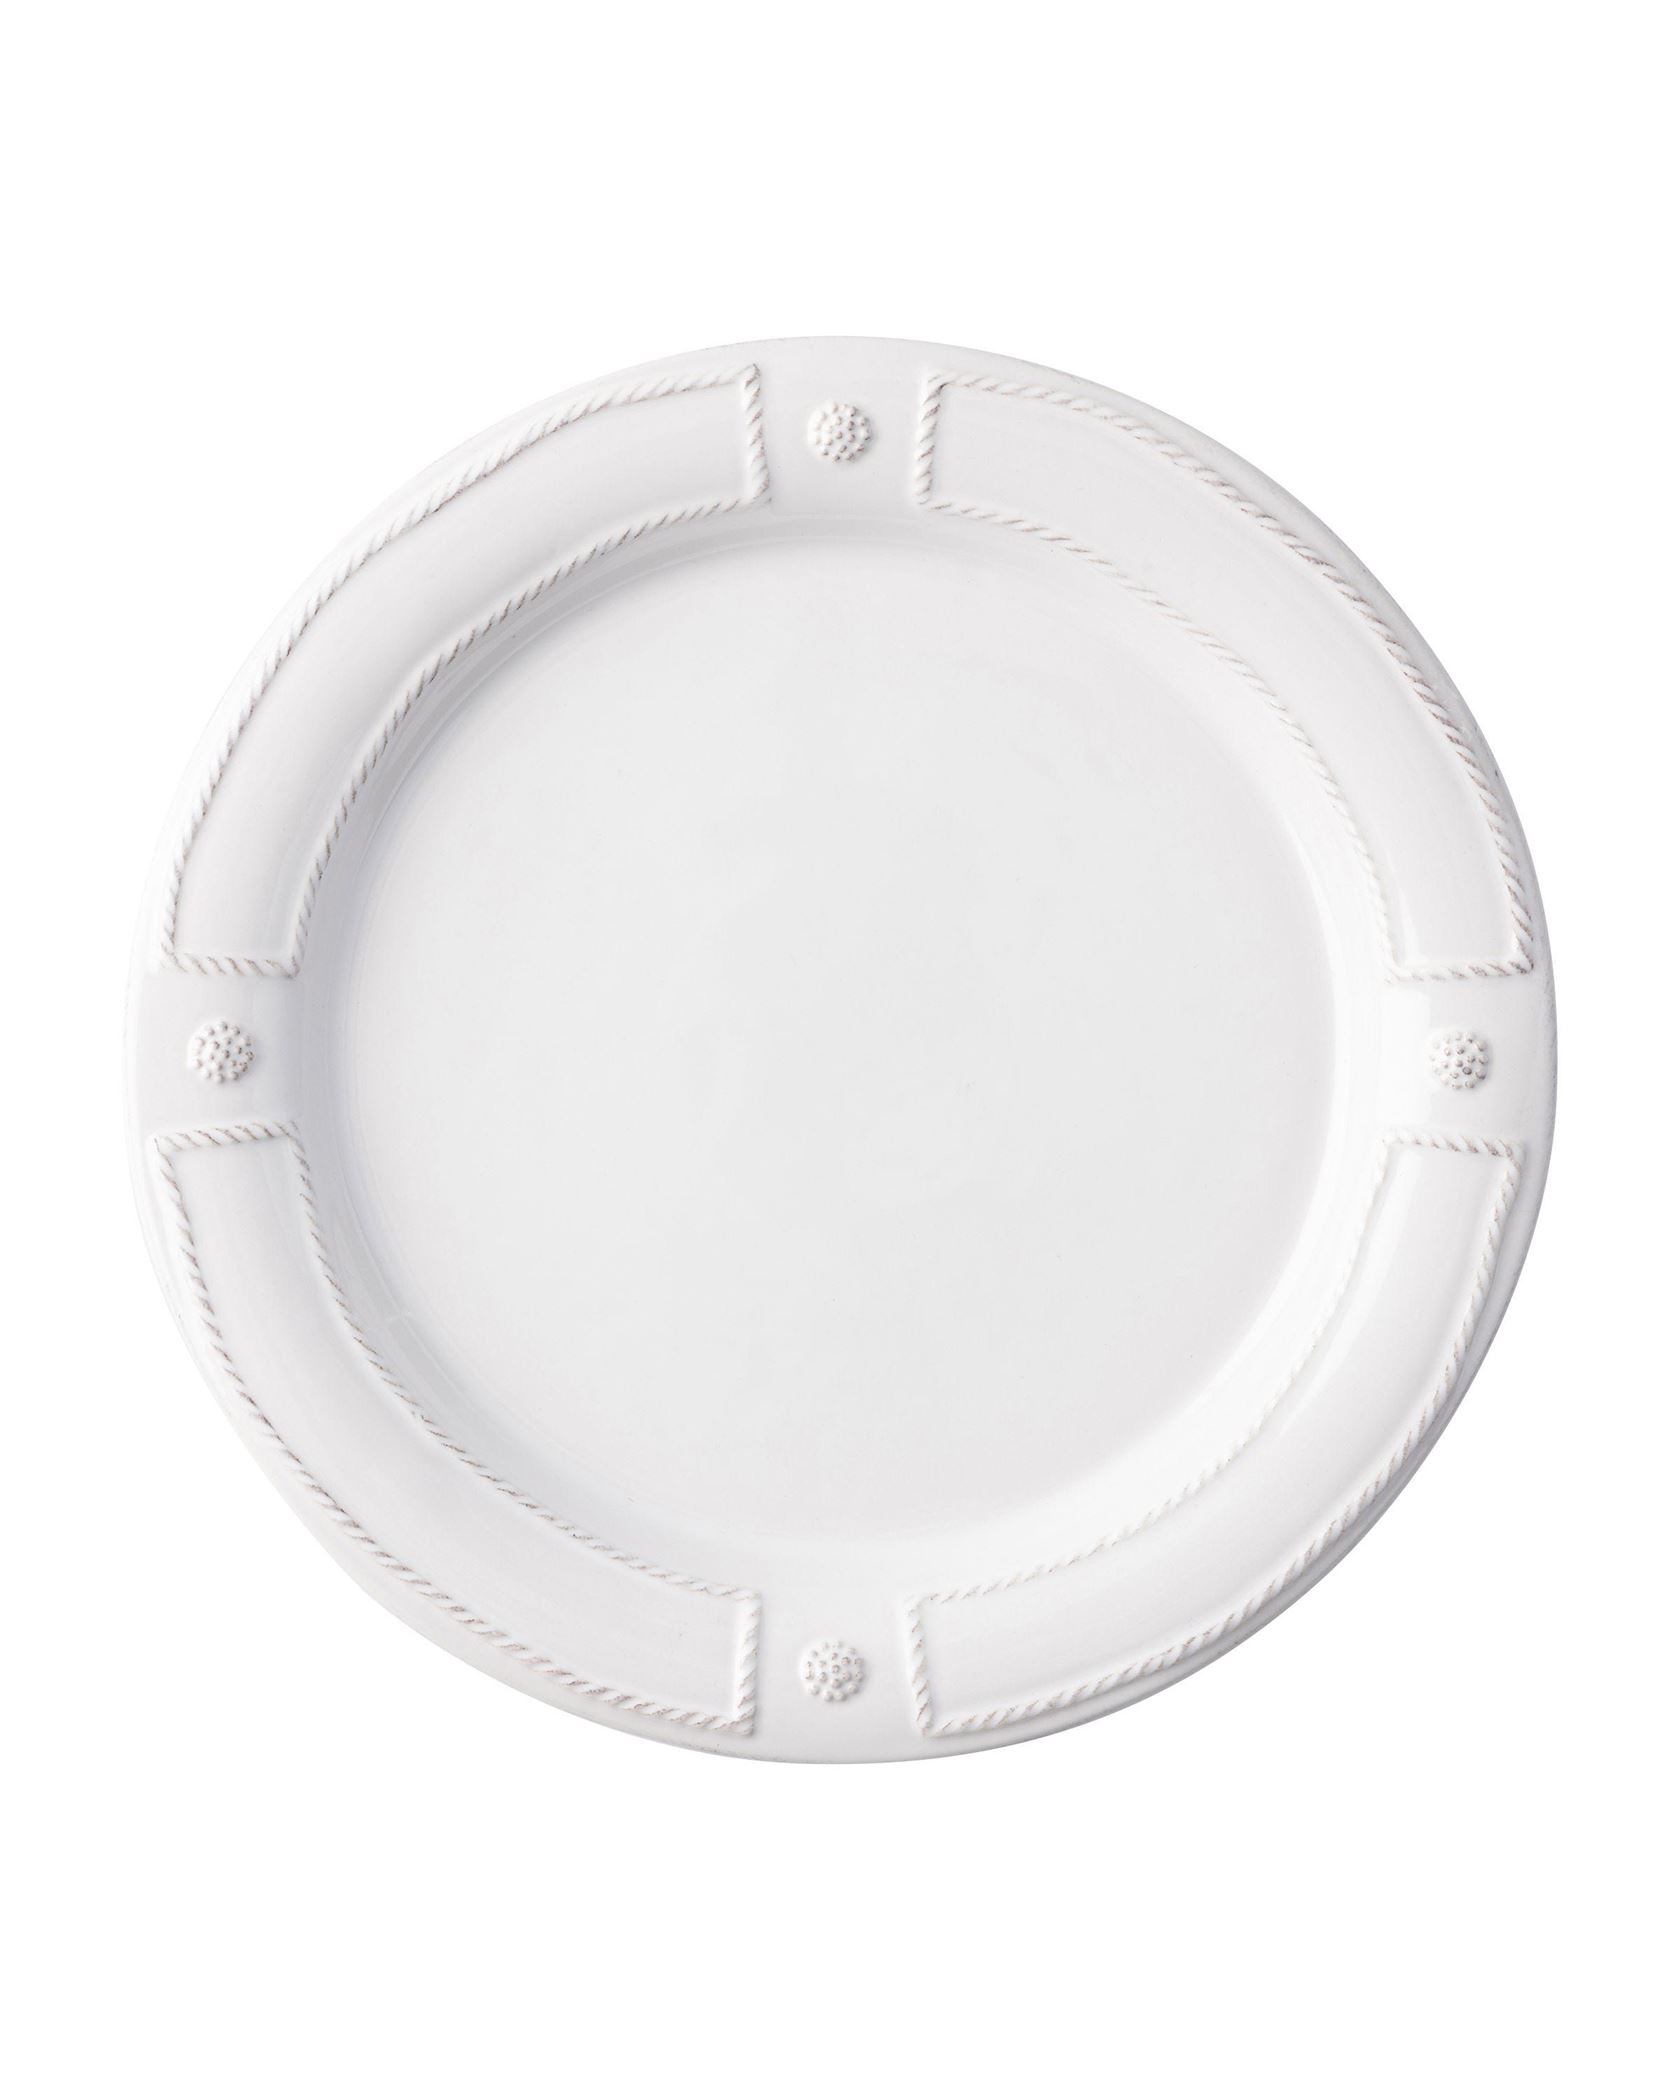 Photo of a white french panel dessert or salad plate.